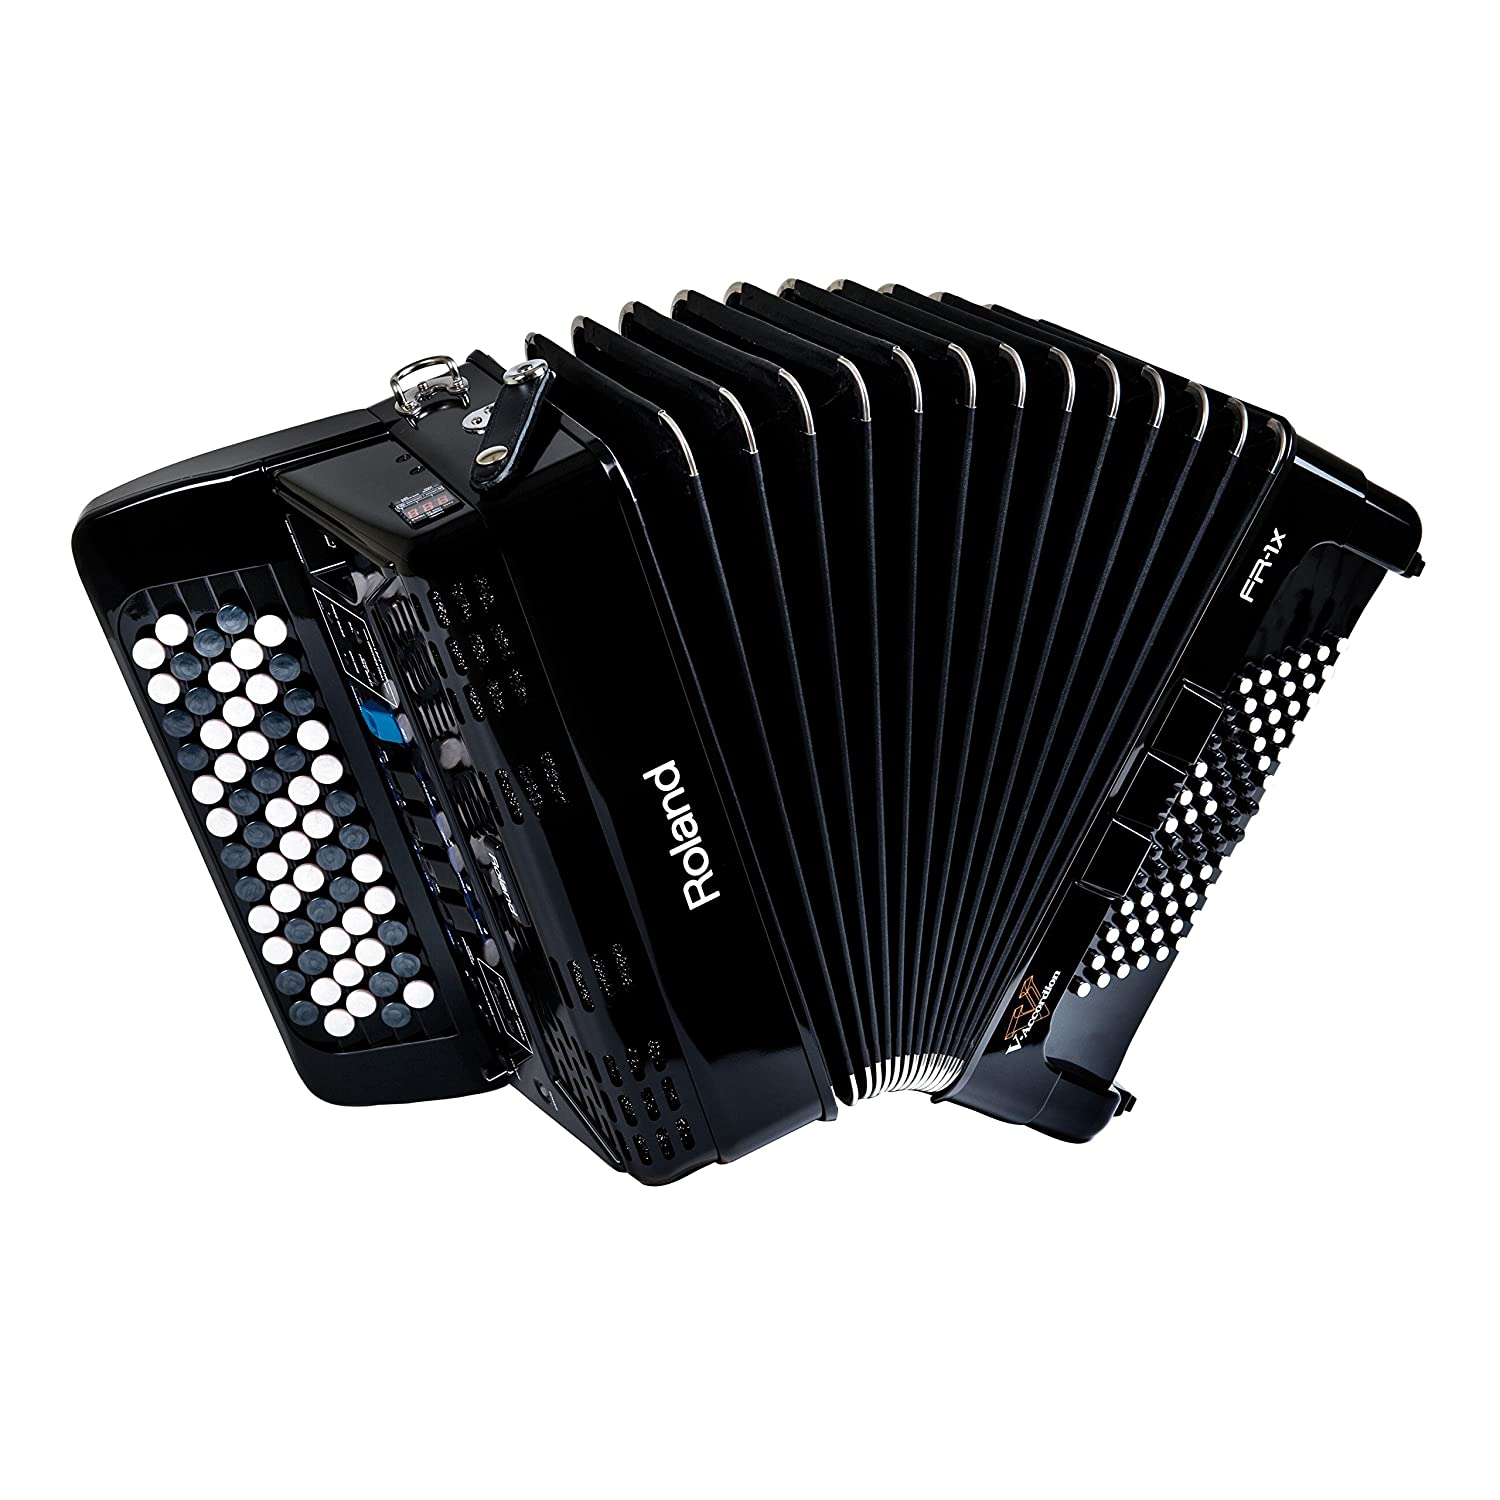 Roland V-Accordion Lite with 62 Buttons and Speakers, black (FR-1XB-BK)